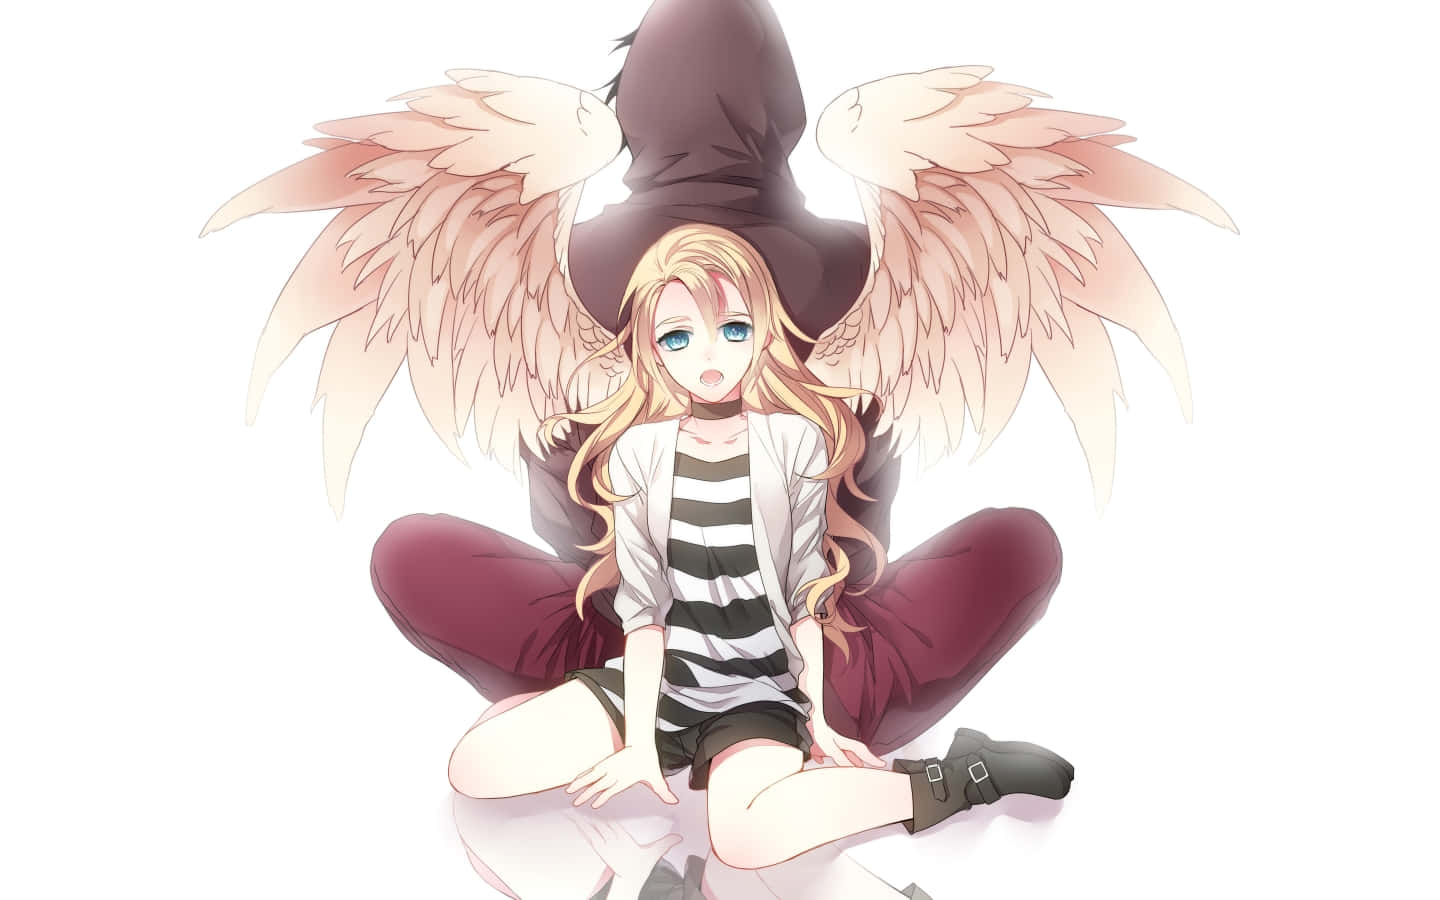 A Girl With Wings Sitting On The Ground